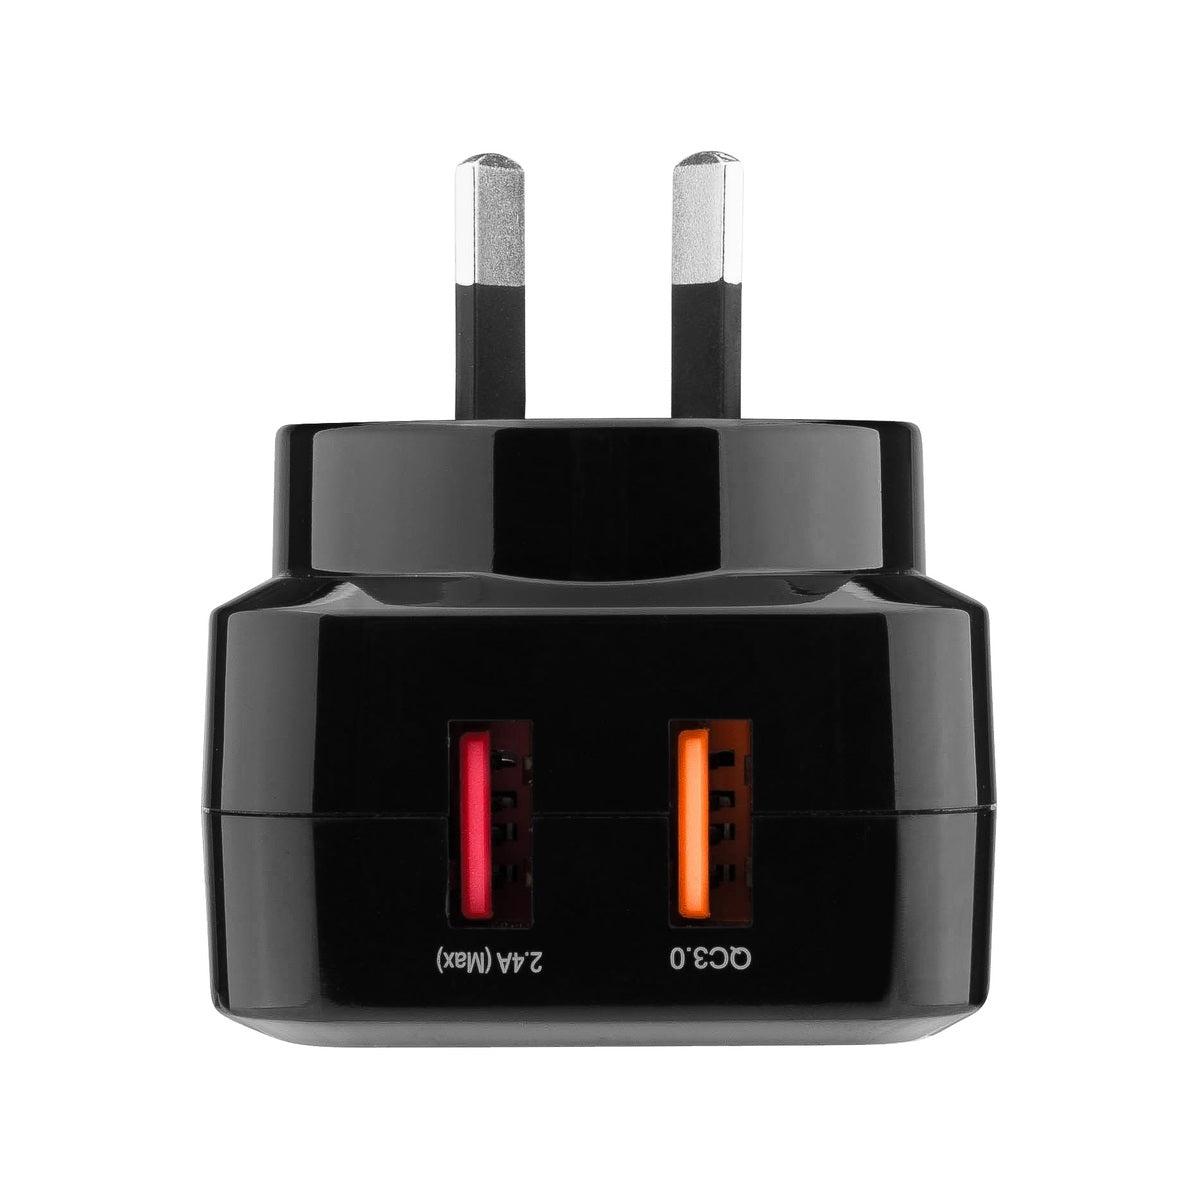 3sixT Wall Charger AU 5.4A + USB-C Cable 1m.